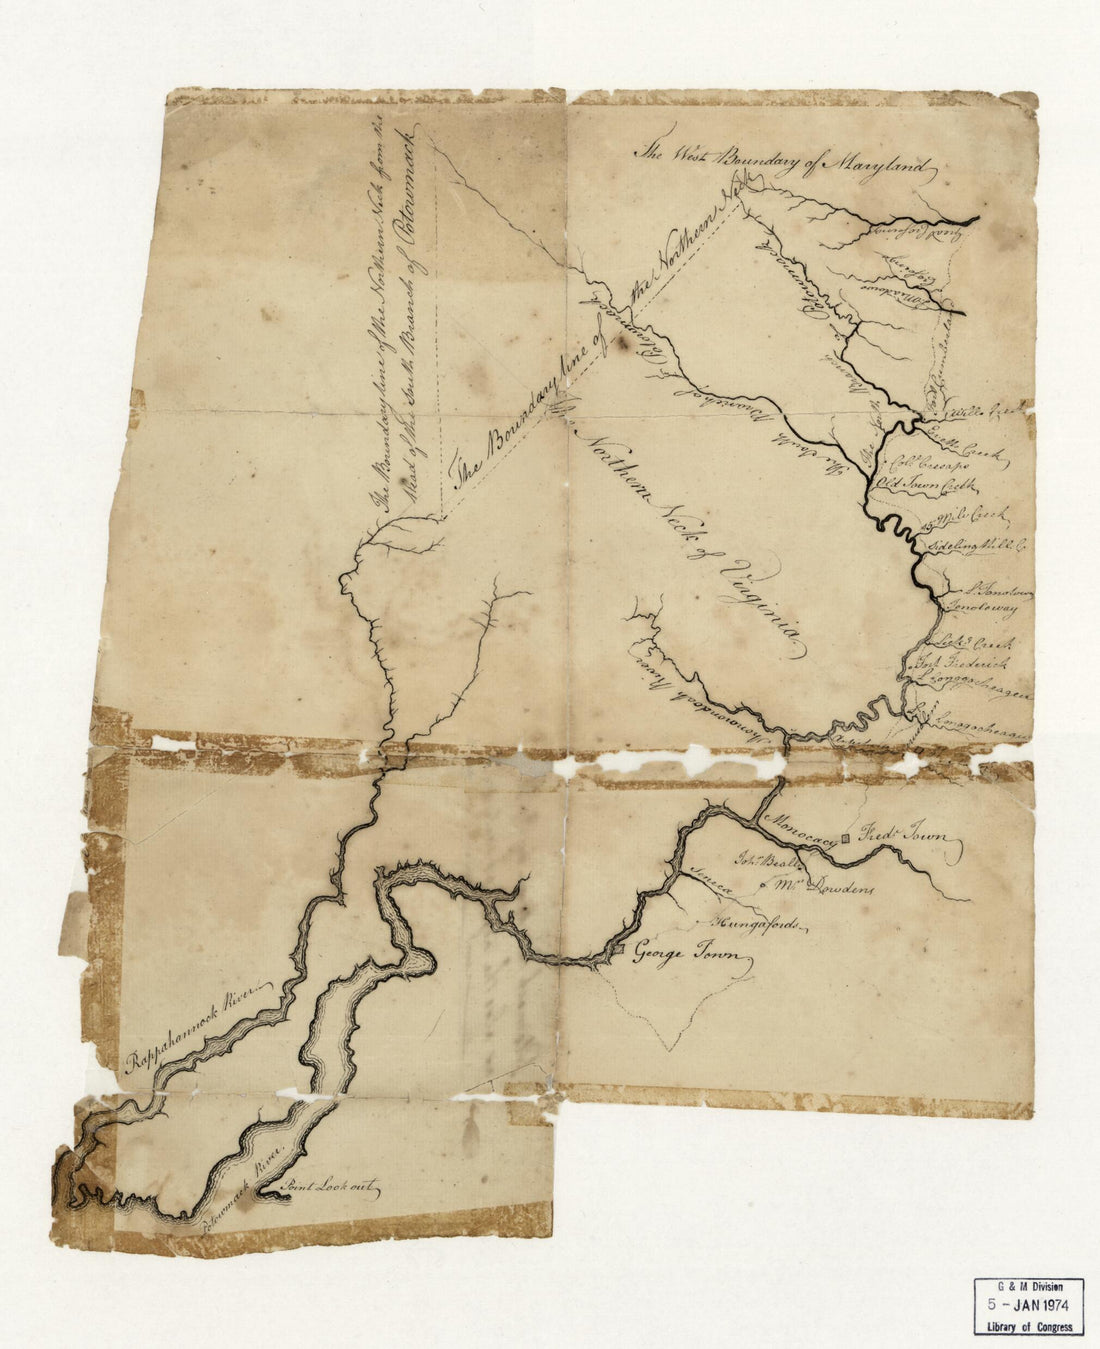 This old map of Potomack from 1770 was created by Robert Booth in 1770